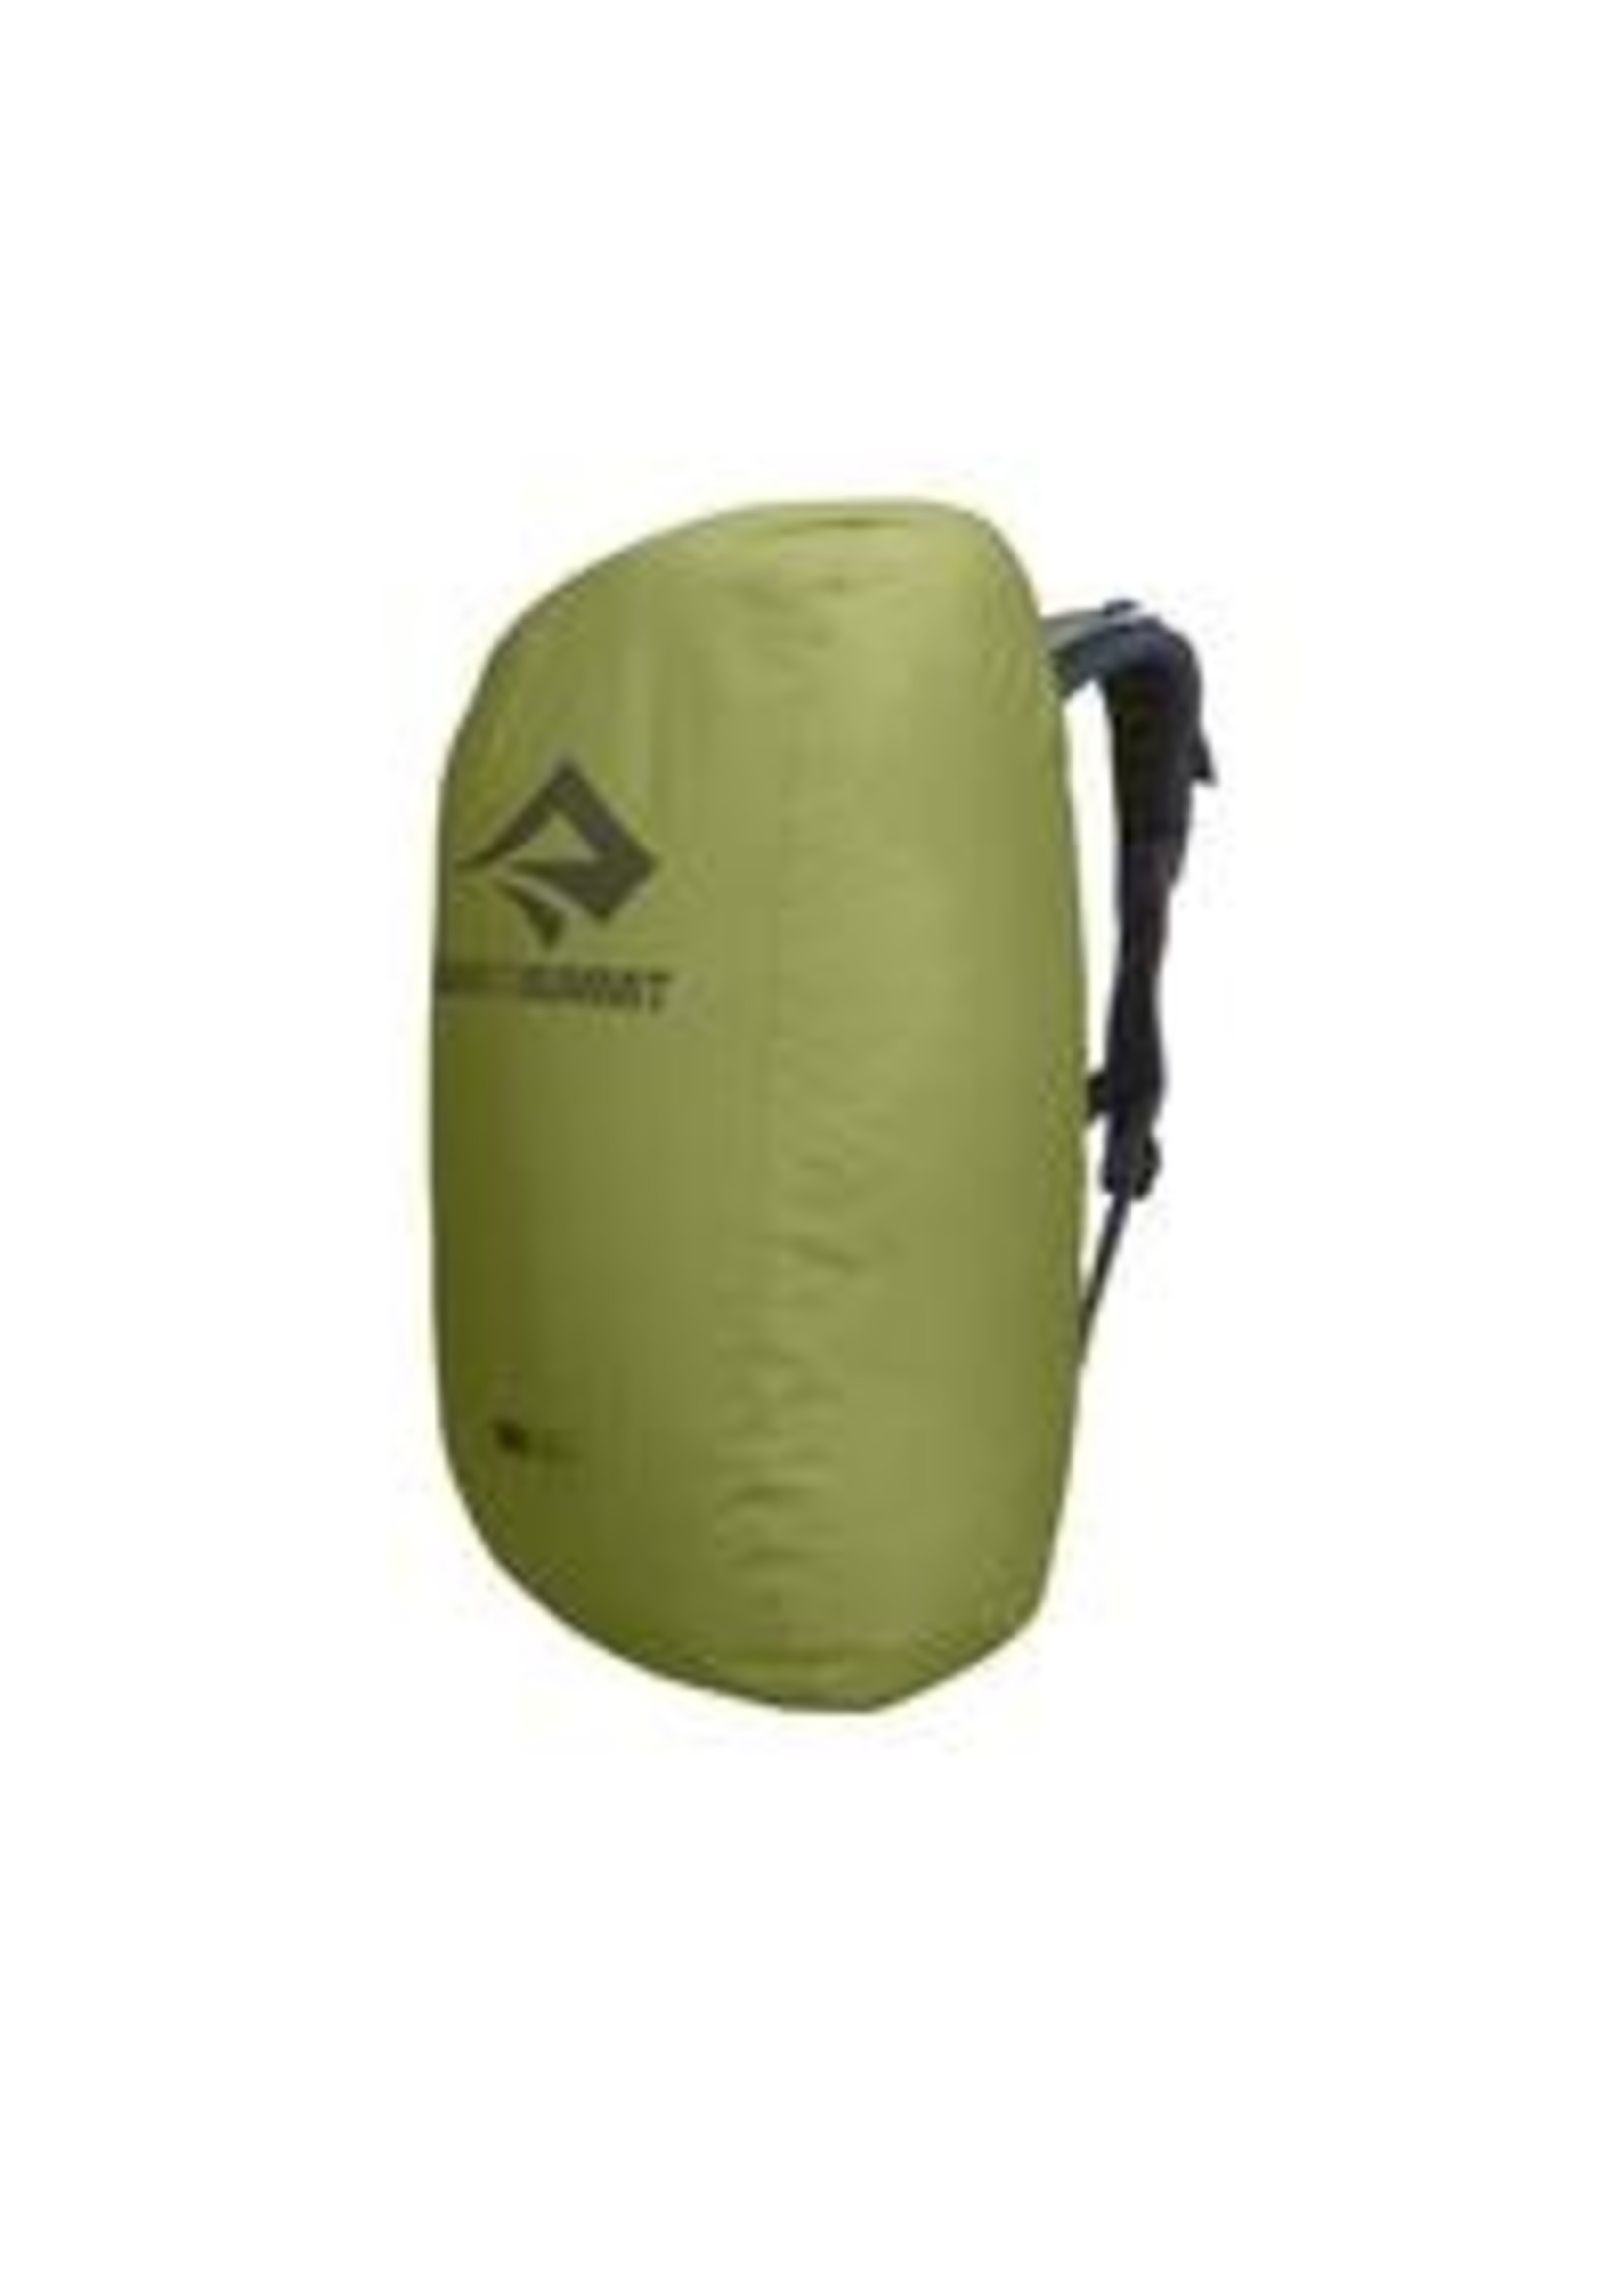 Sea To Summit Pack Cover - Small - 30L to 50L - Olive Green